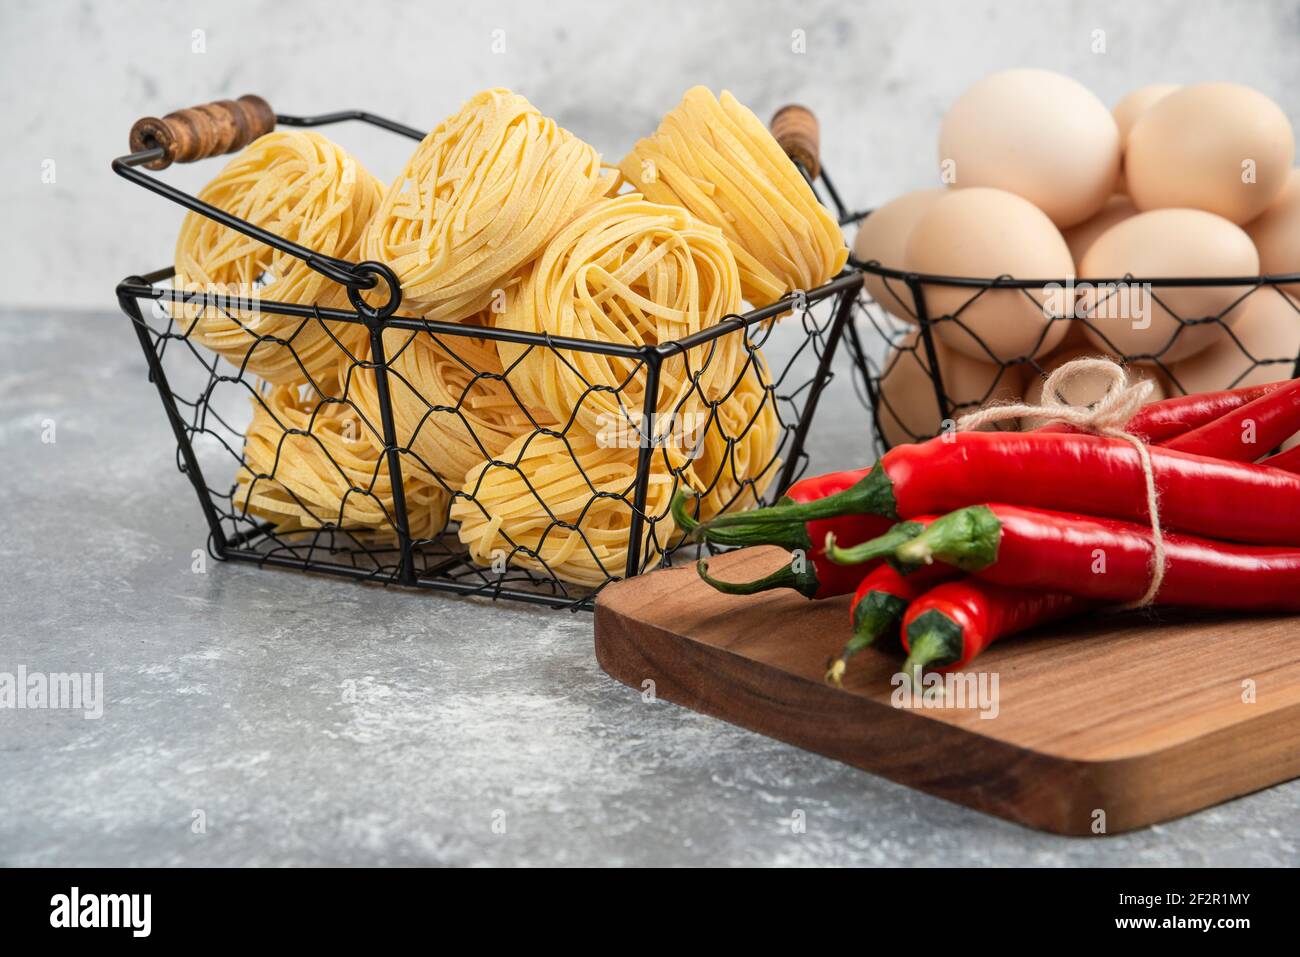 Basket of raw noodles, chili peppers and eggs on marble surface Stock Photo